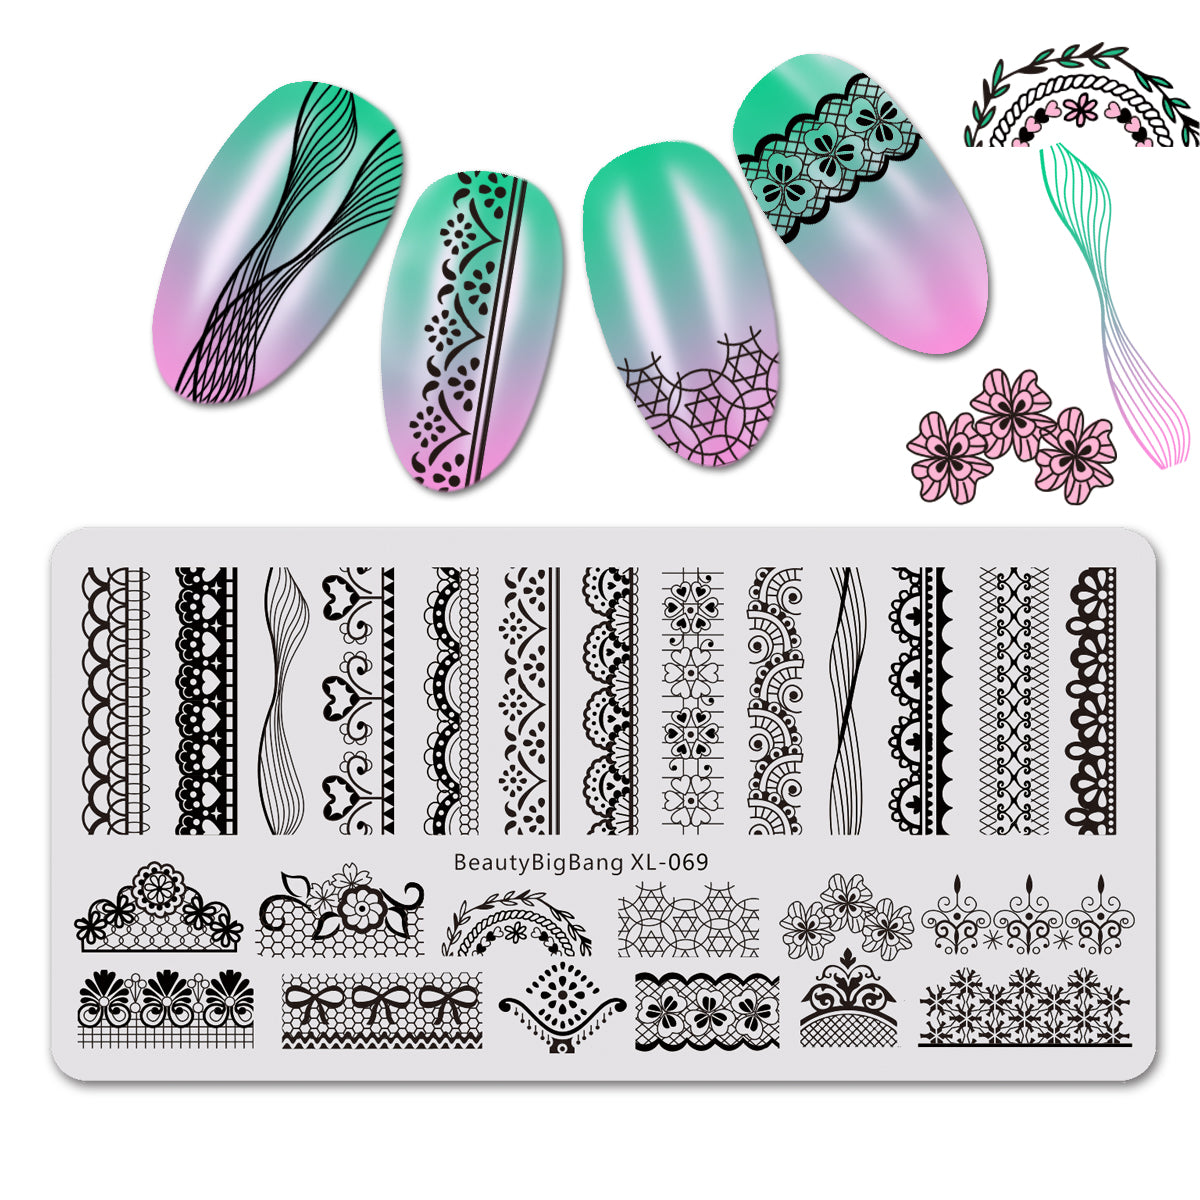 French Theme Rectangle Lace Design Nail Art Stamping Plate For